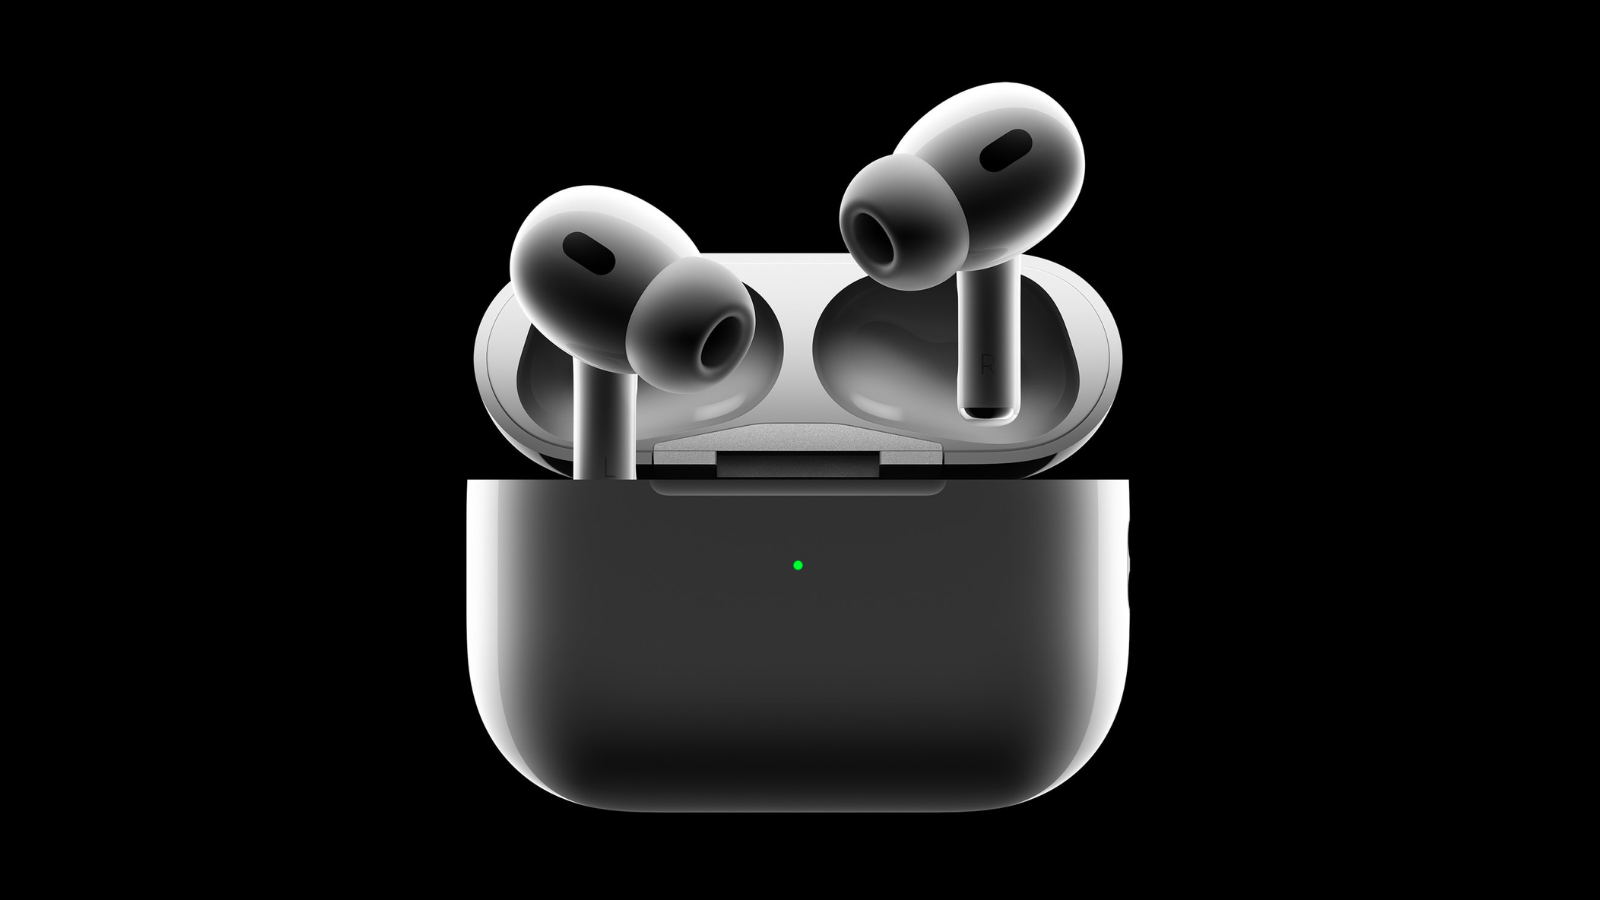 a pair of second-generation airpods pro with their charging case against a black background